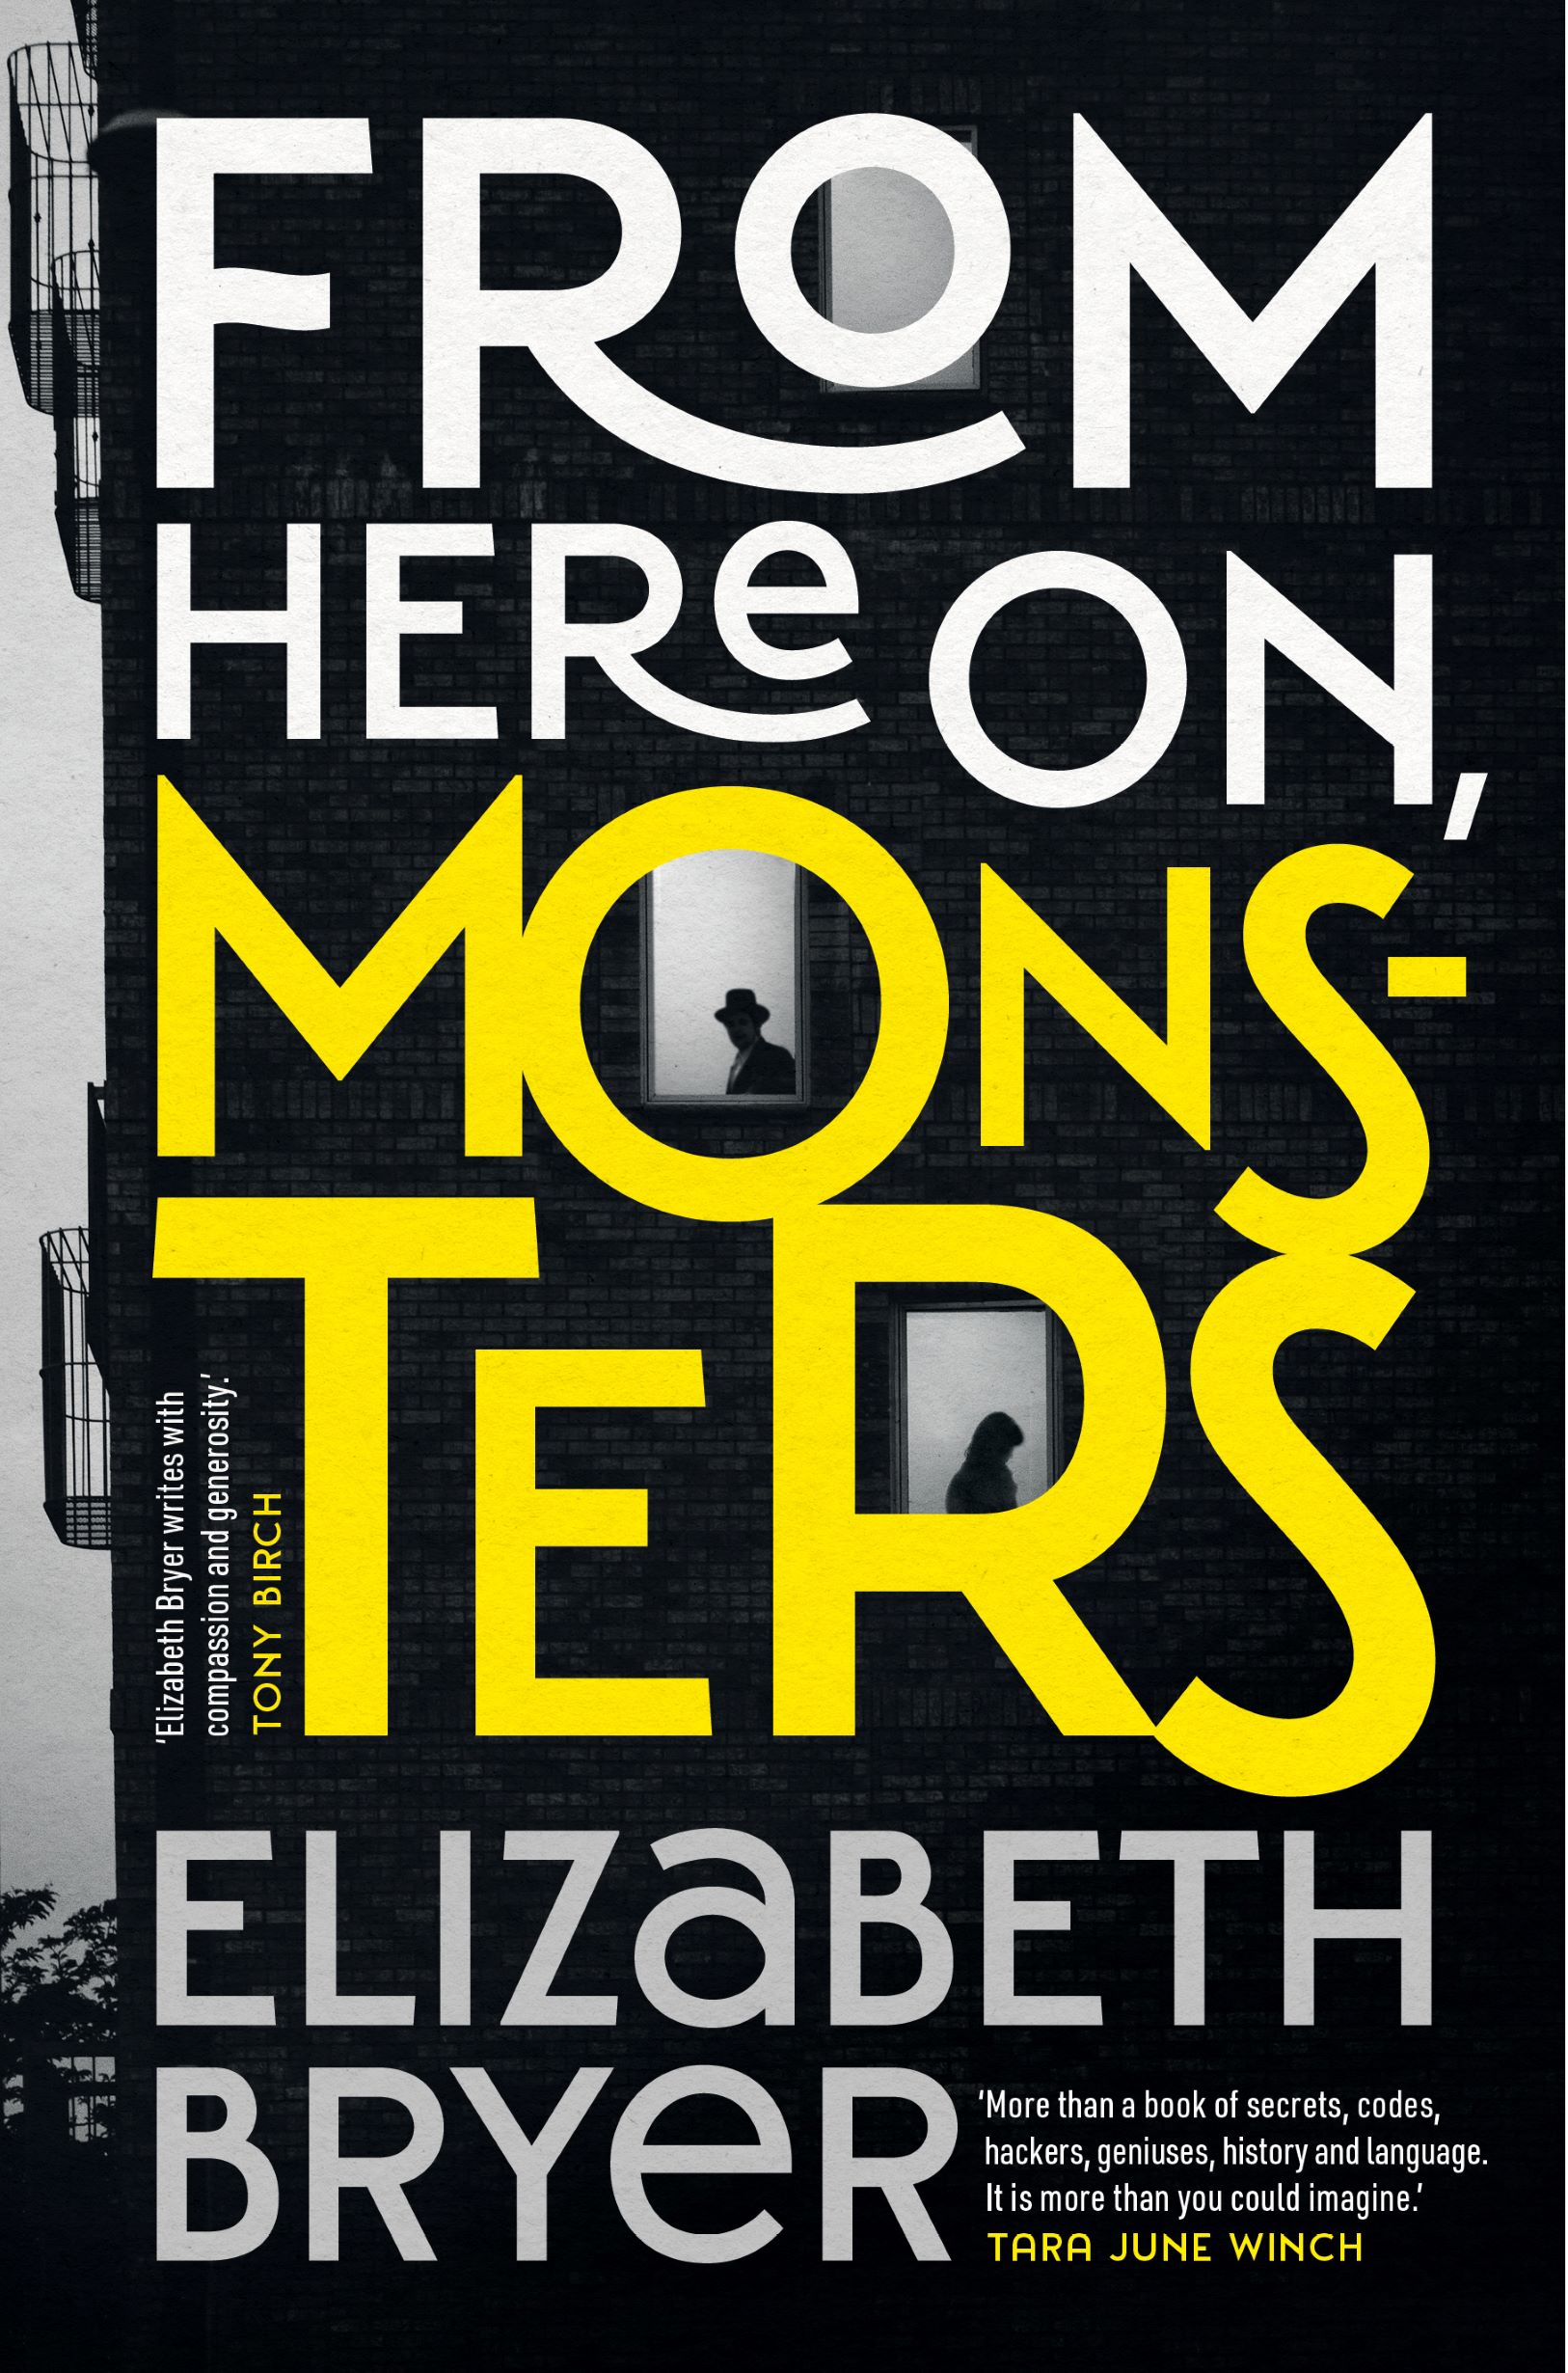 From Here On, Monsters by Elizabeth Bryer (Picador, RRP $29.99)